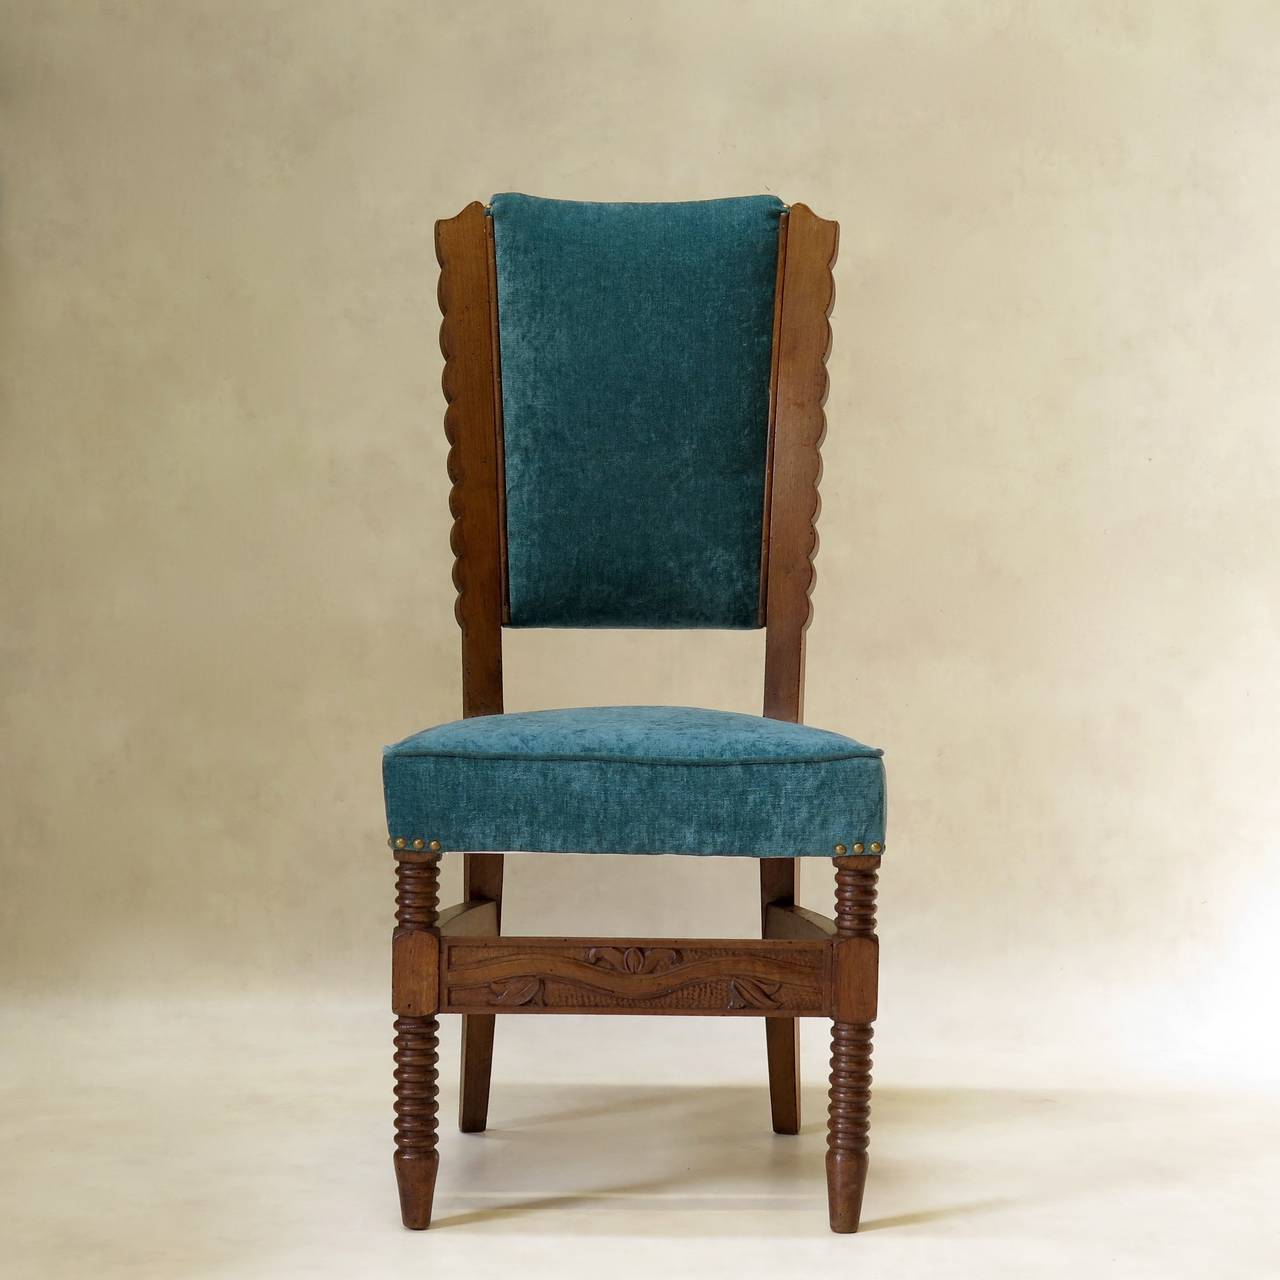 Unusual and elegant set of six dining chairs with carved wooden structures. Tapered backs with scalloped edges, extending down into sabre legs. Ringed front legs, joined by a carved stretcher. Newly upholstered in plush teal velvet.